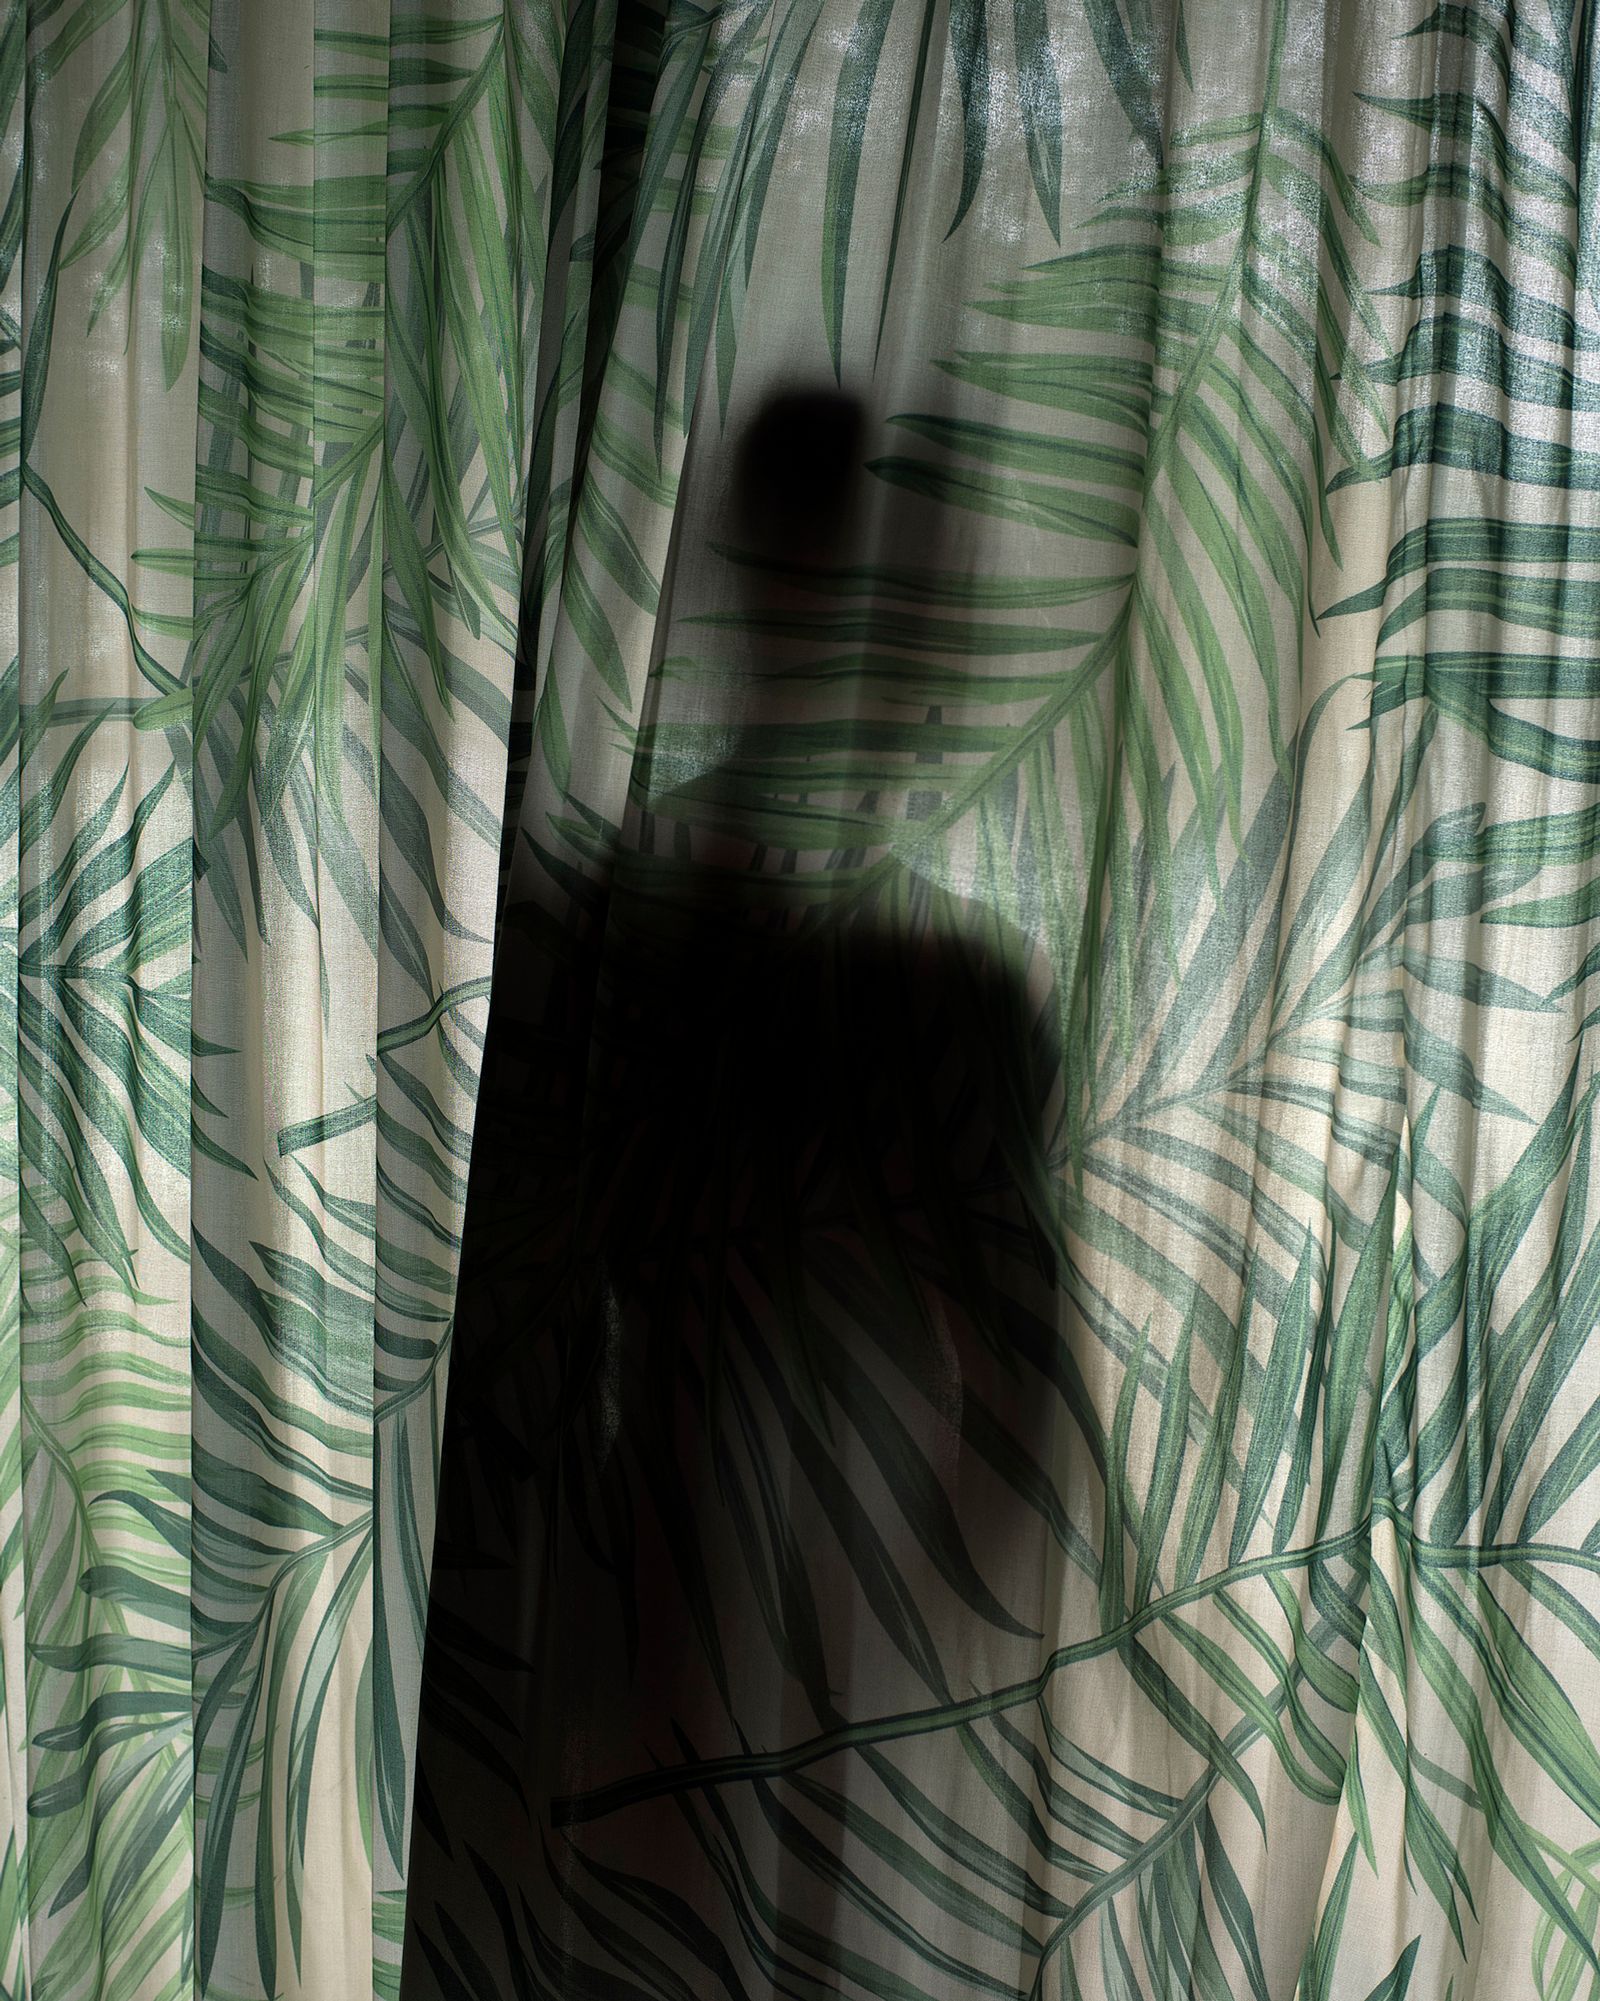 © Jasmine Clarke - Image from the Shadow of the Palm photography project